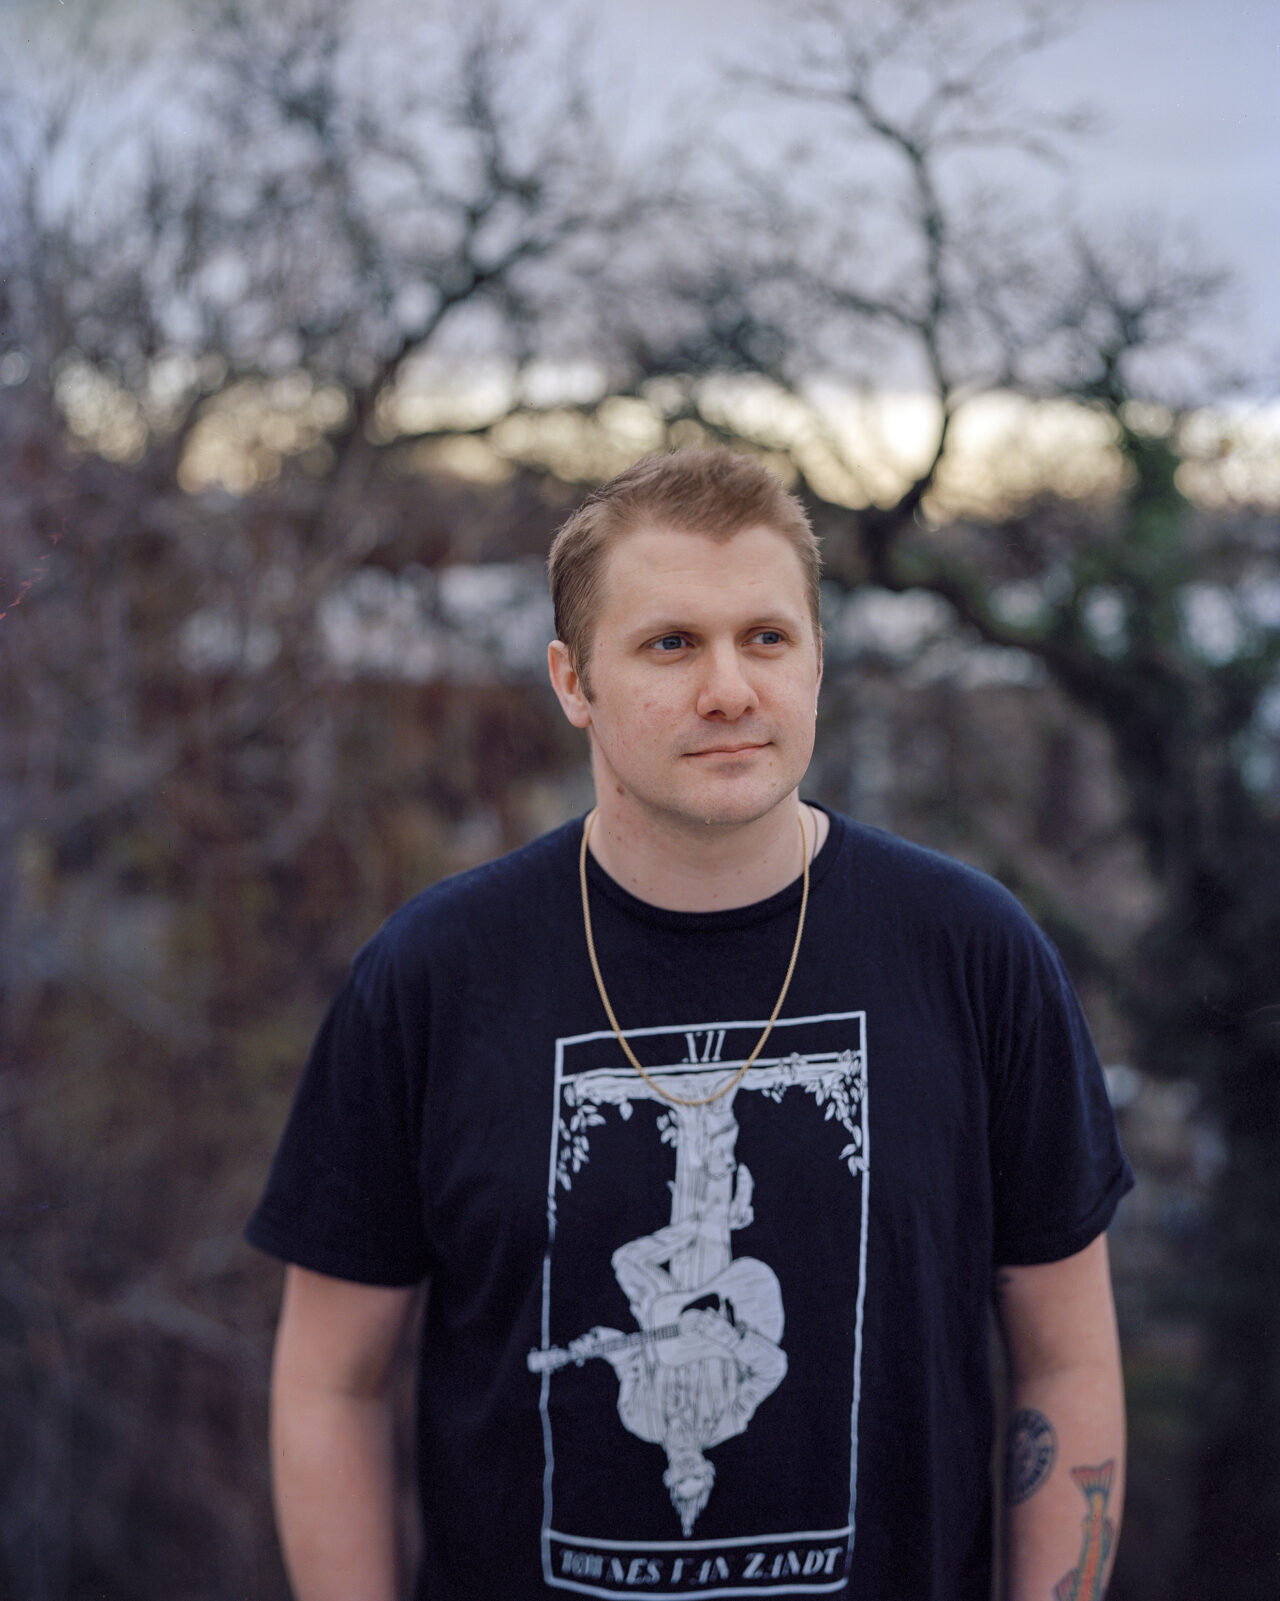 Brent, a white man with blonde hair, wearing a black T-shirt and gold chain, looks slightly past the camera, a slight smile on his lips.